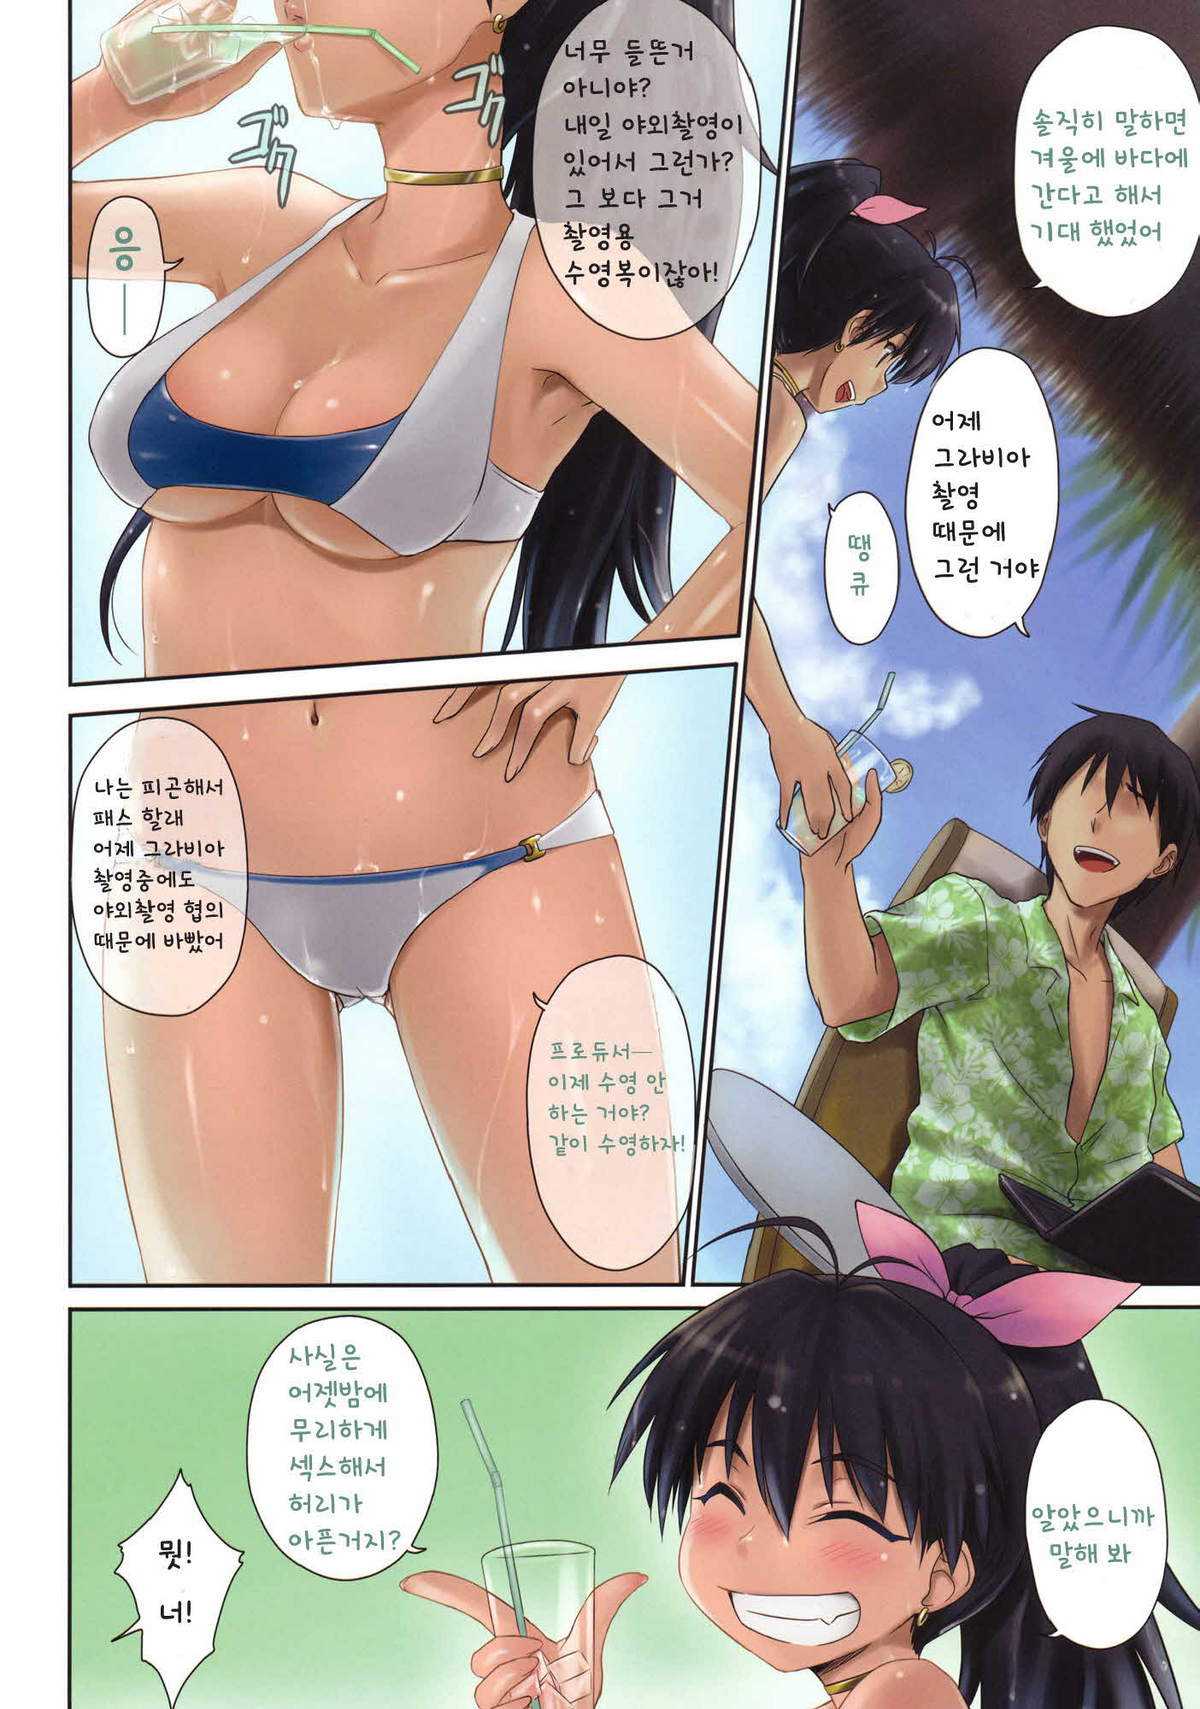 (C79) [ASGO] Trial Vacation (THE iDOLM@STER) (korean) (C79) [ASGO] Trial Vacation (アイドルマスター) [韓国翻訳]